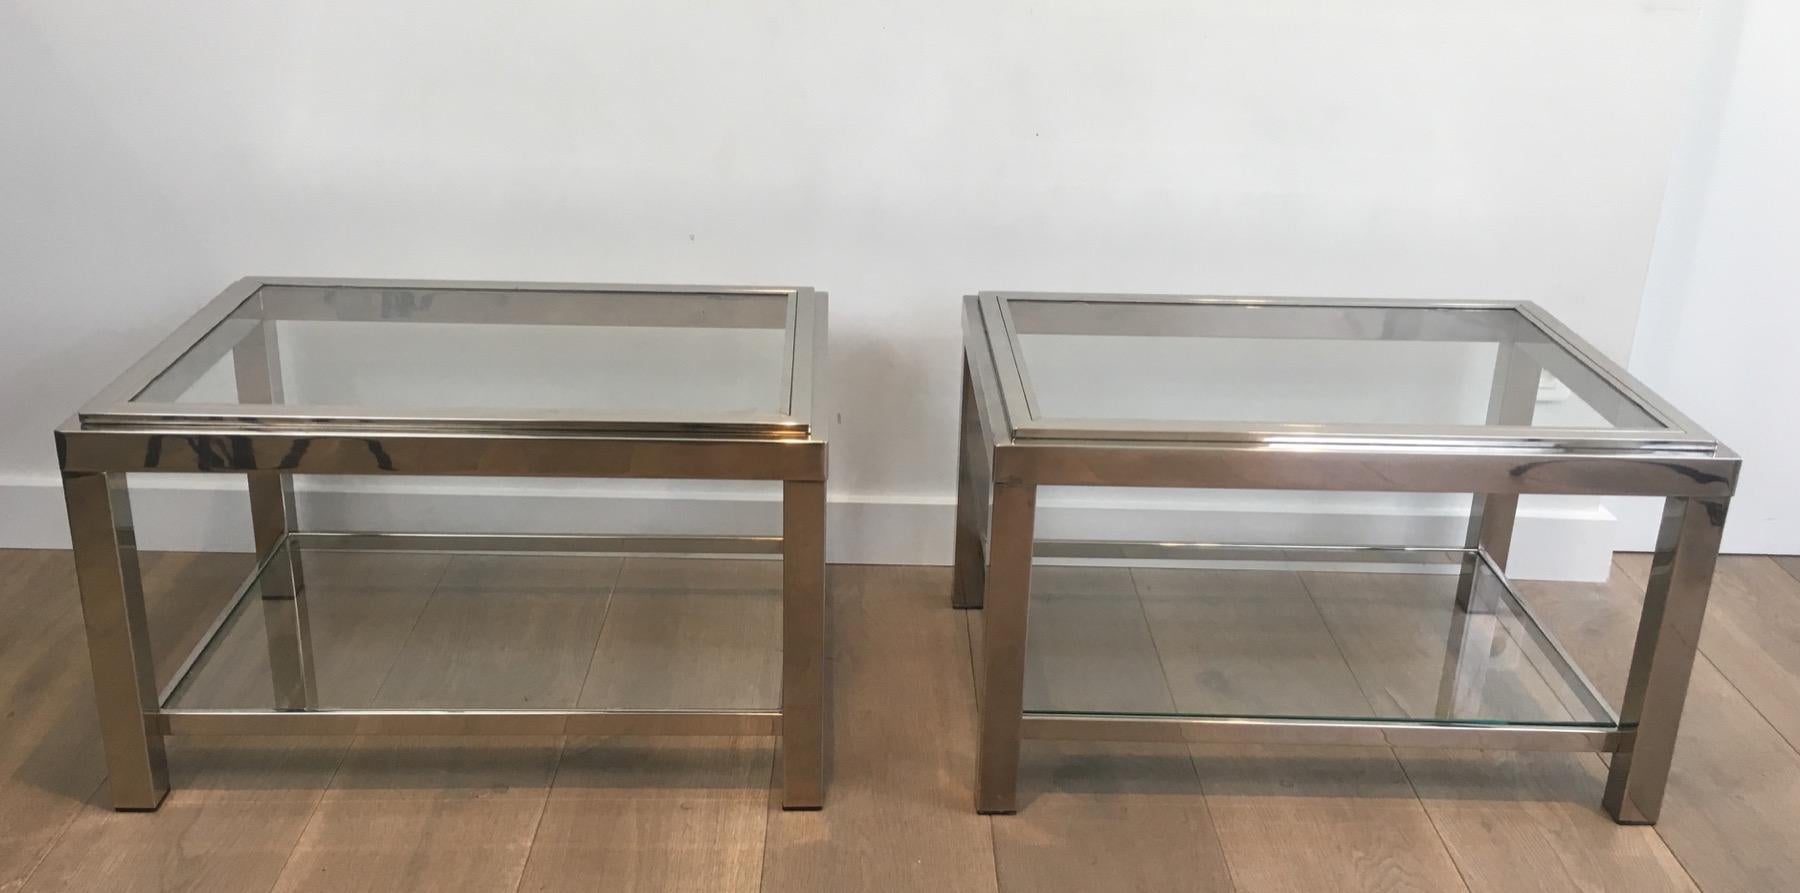 Pair of Rectangular Chrome Side Tables. French, Circa 1970 For Sale 7